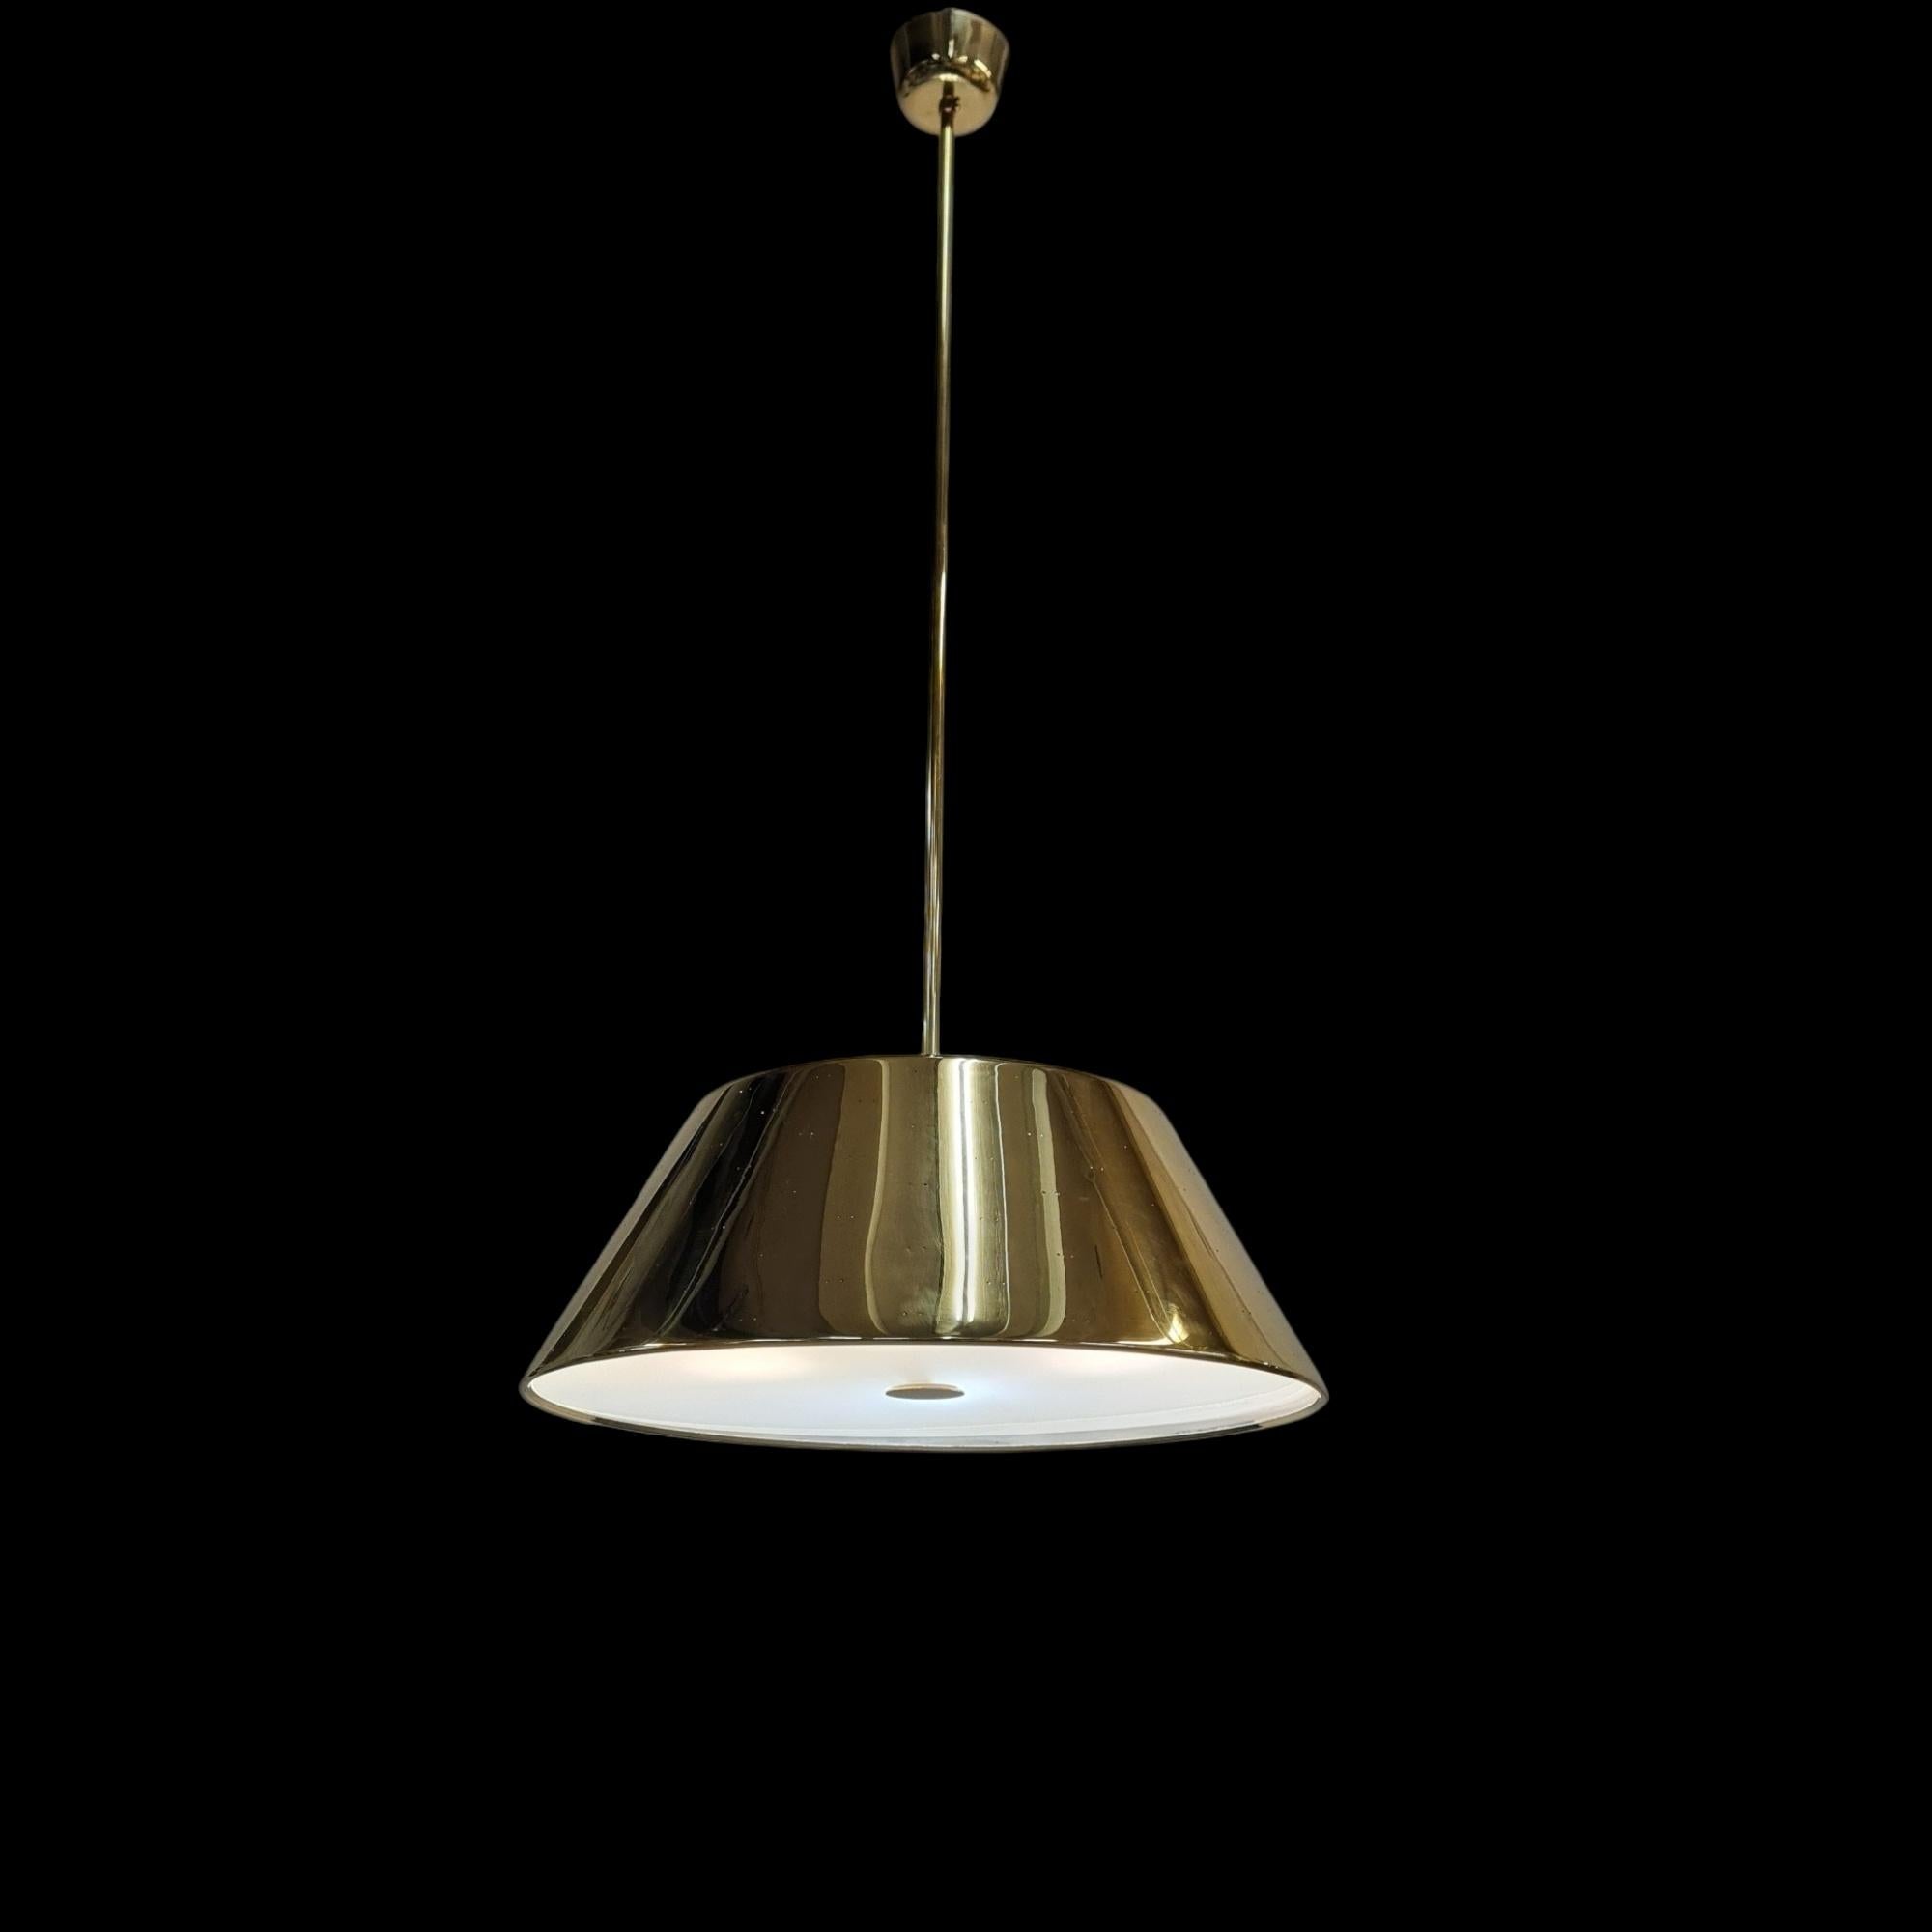 A large brass ceiling lamp by the master of Finnish lighting design Paavo Tynell. This sizable brass lamp has a diameter of 60cm and is considerably larger than models more commonly seen of 40-50cm lamps. The pendant has four sockets for lamps and